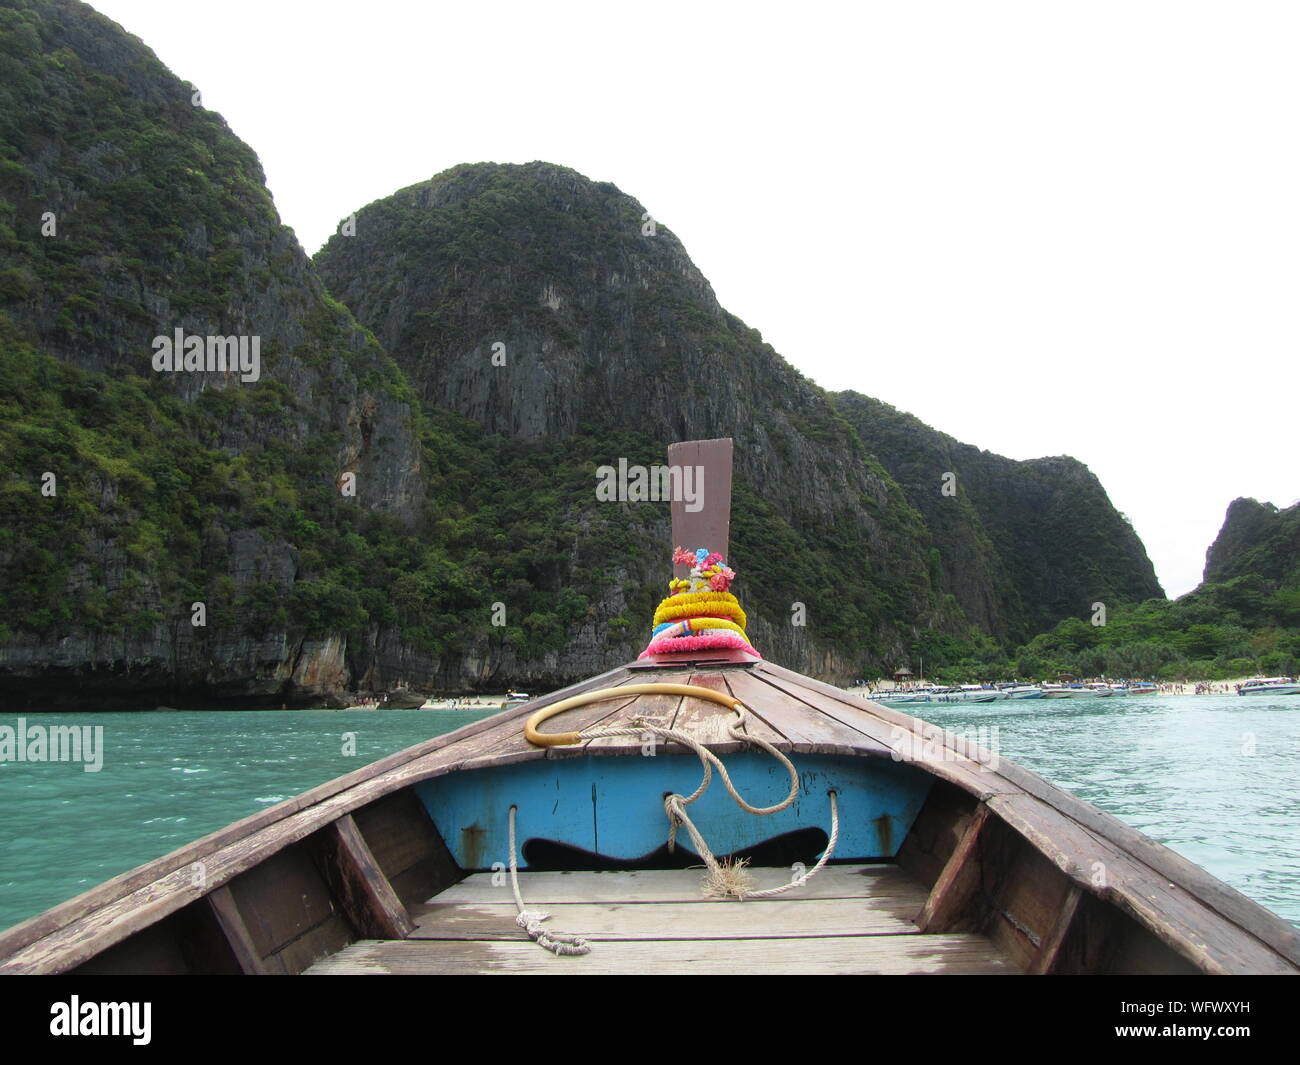 Longtail Boat In Sea Against Rocky Mountains At Krabi Province Stock Photo